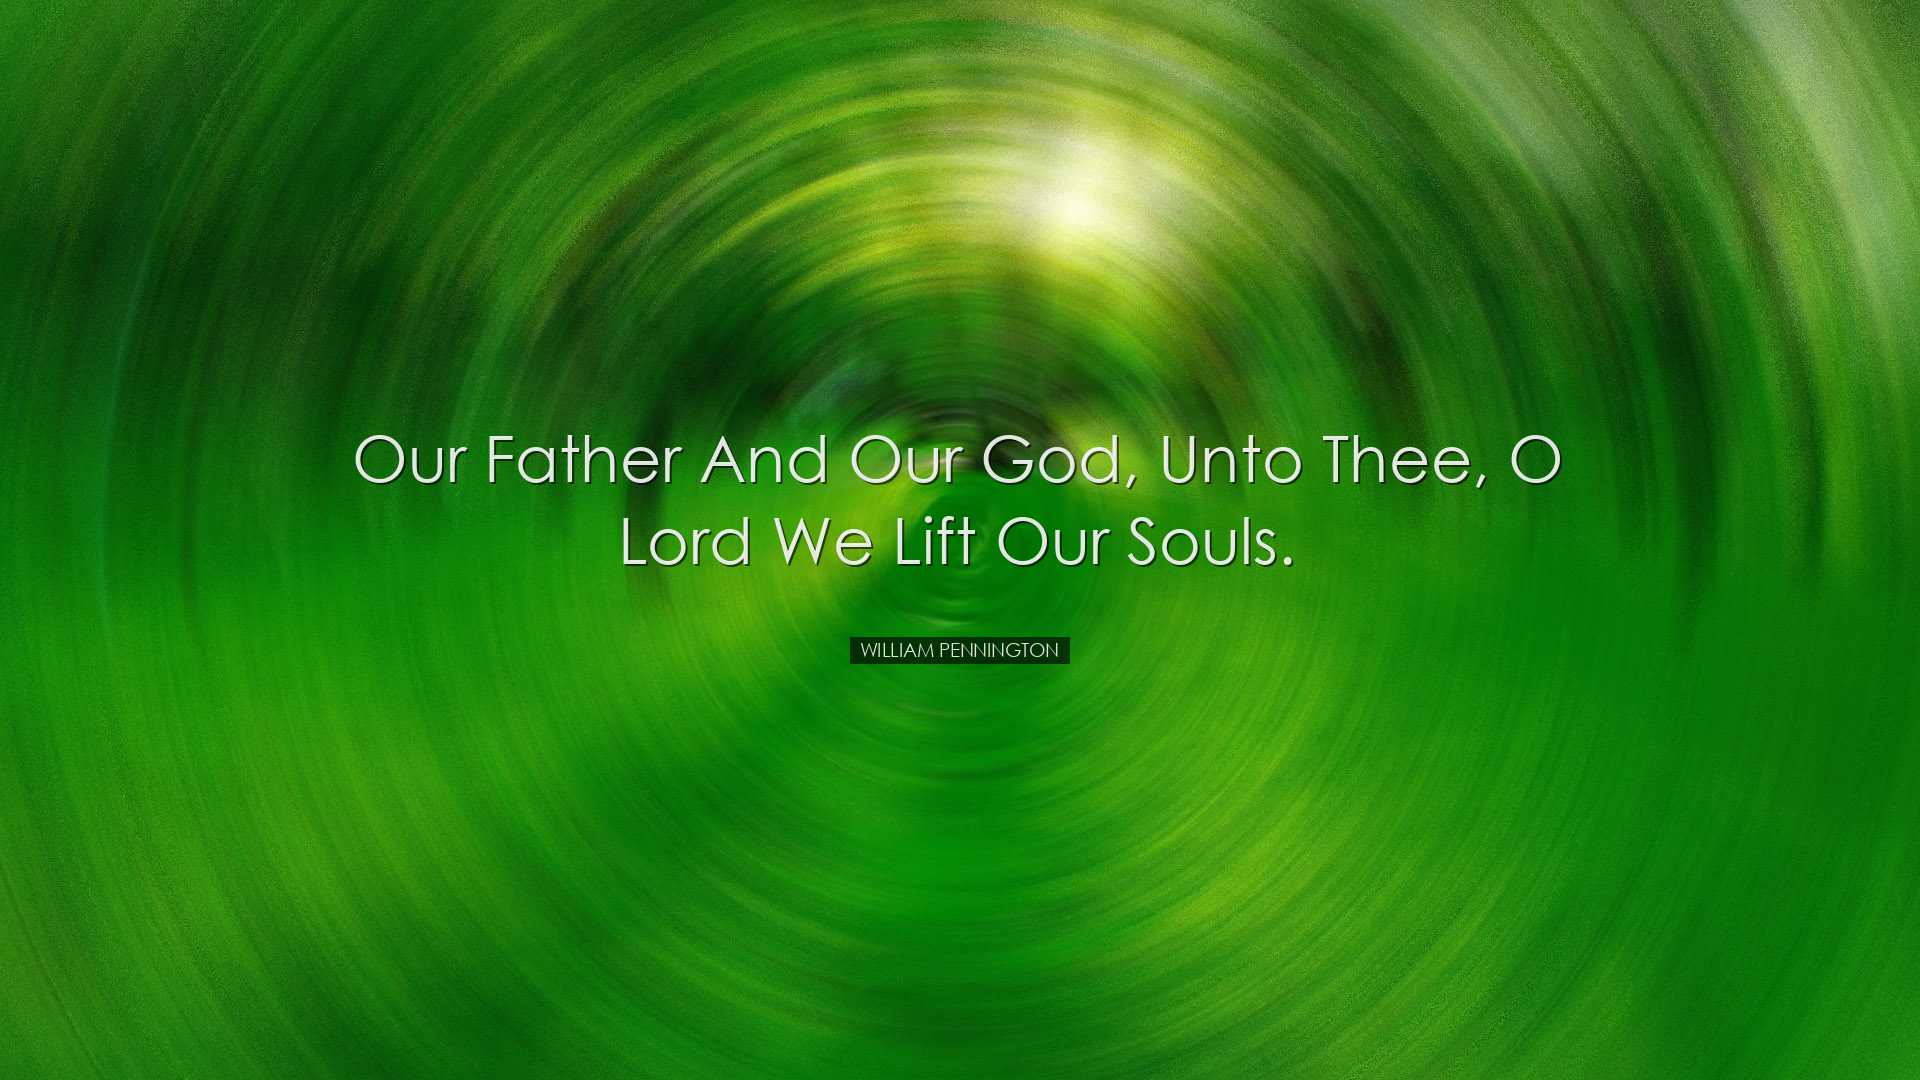 Our Father and Our God, unto thee, O Lord we lift our souls. - Wil